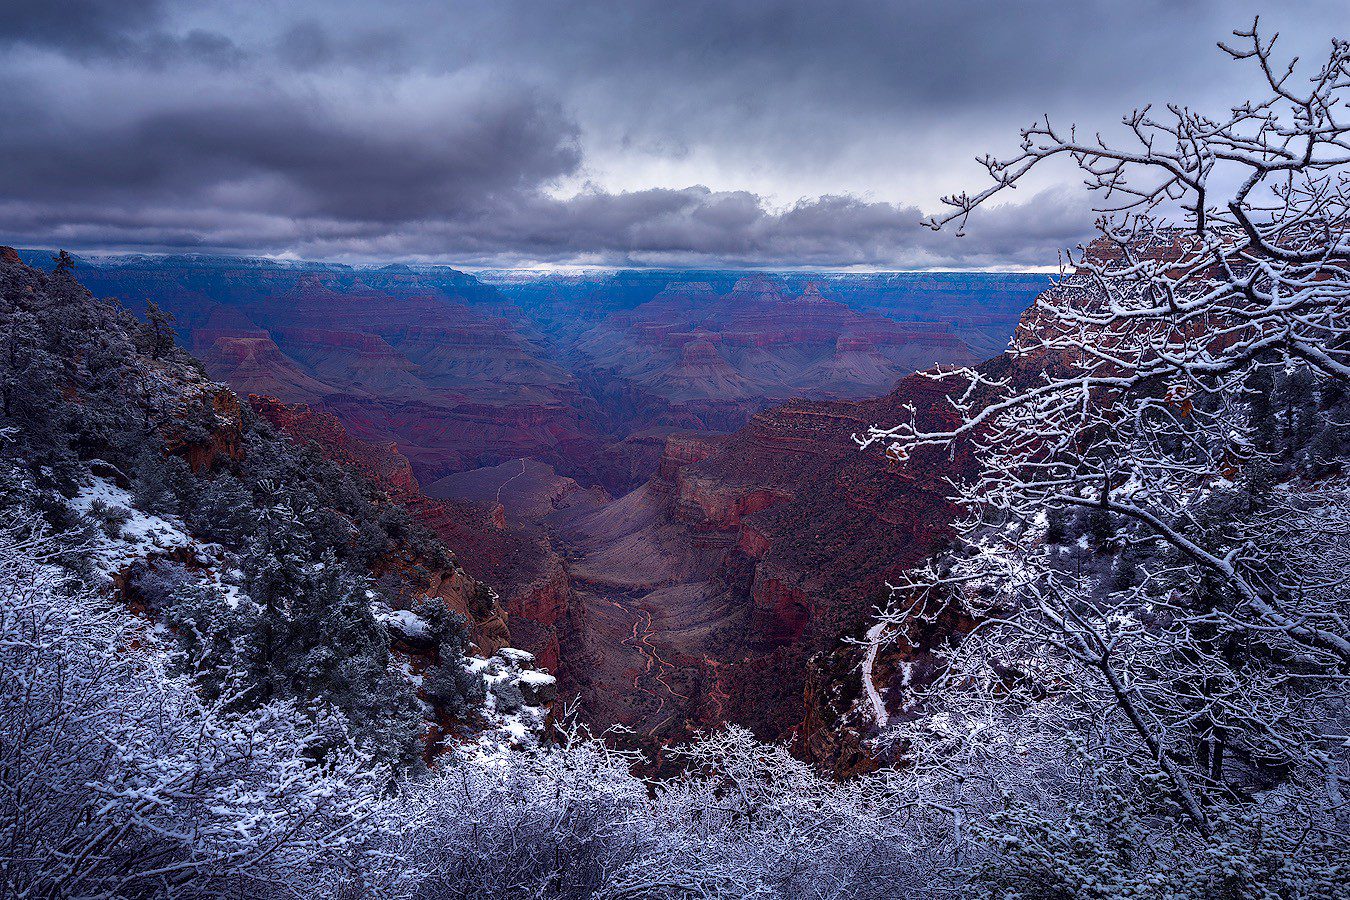 Snow falling over the Grand Canyon in Arizona